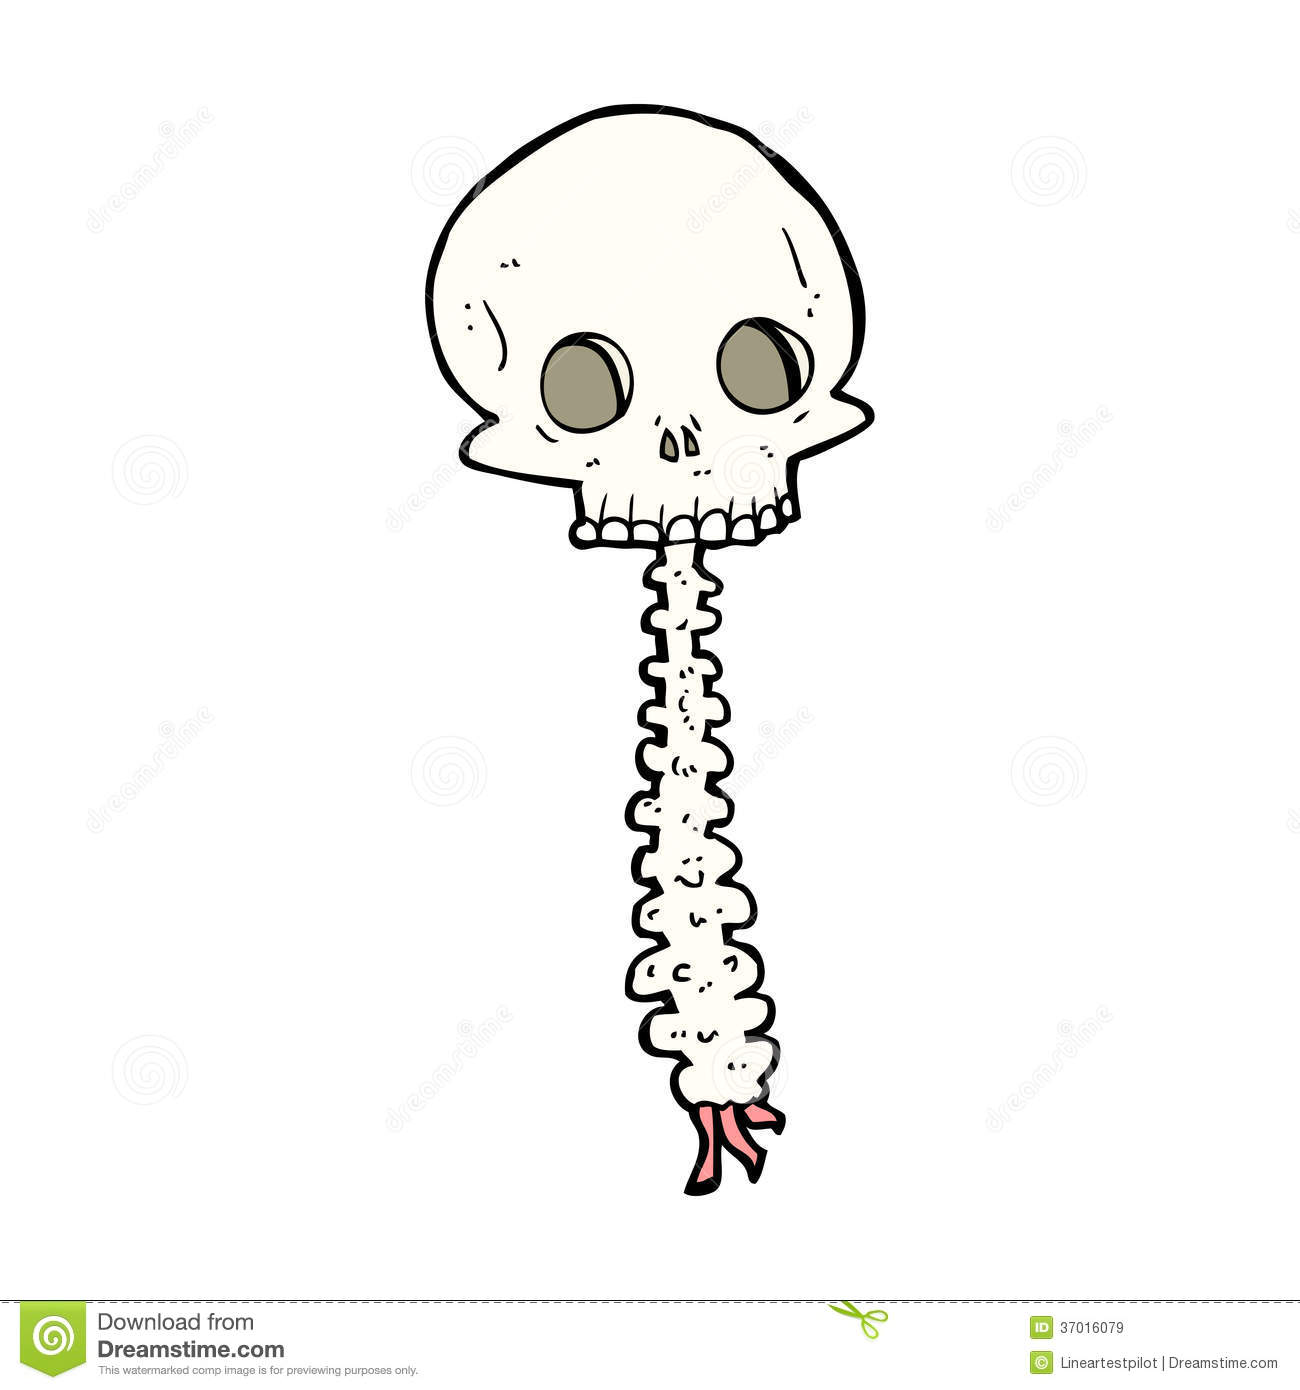 Spine Clipart Royalty Free Stock Images  Spooky Cartoon Sull And Spine